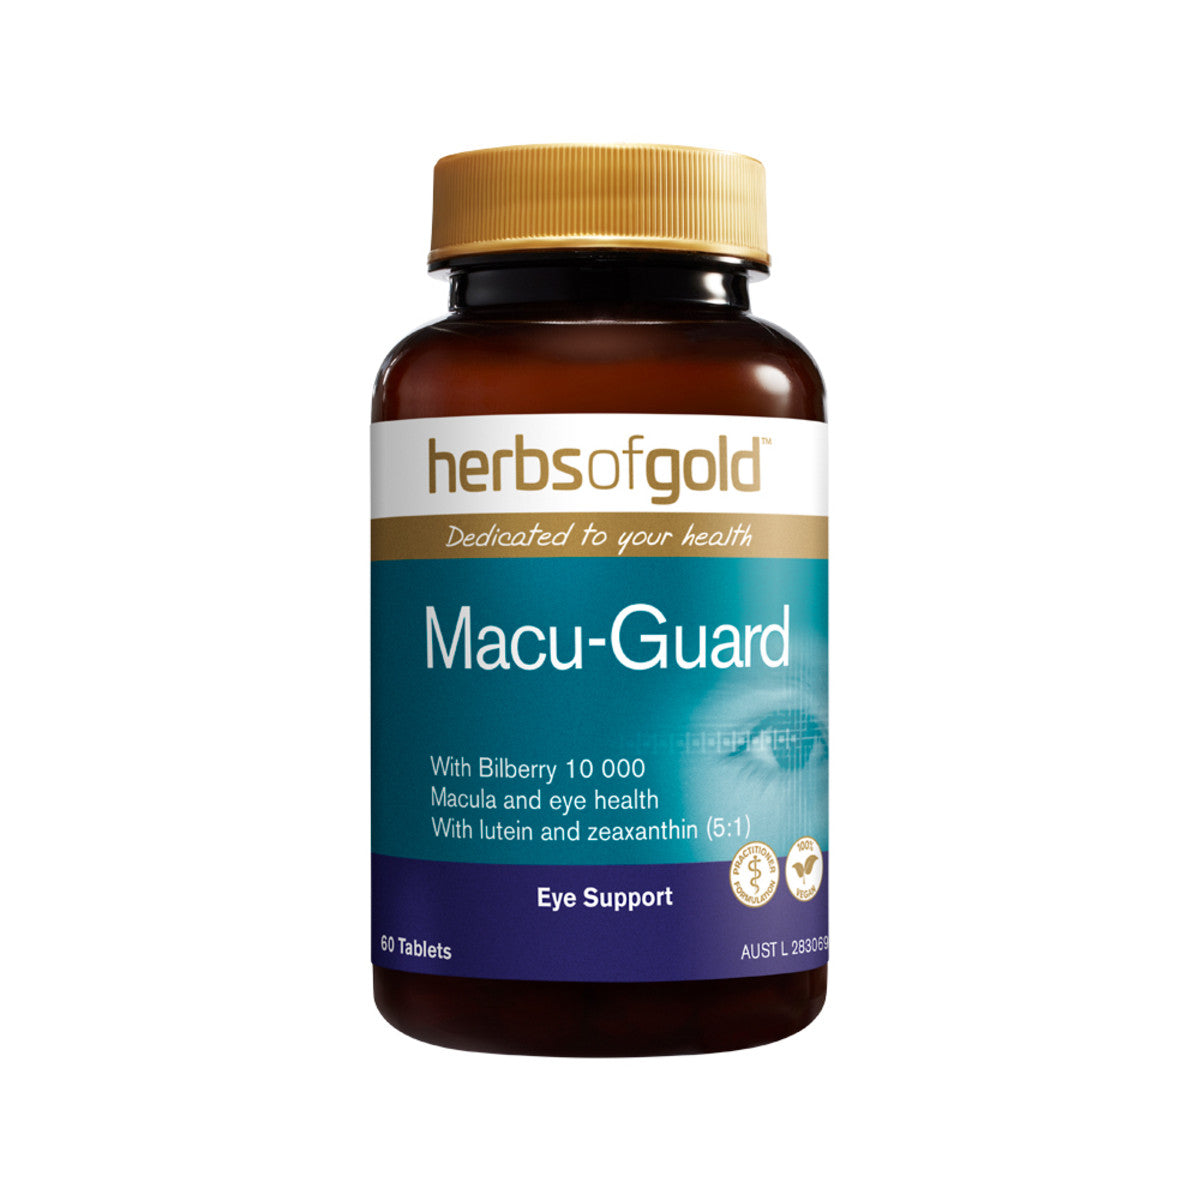 Herbs of Gold Macu-Guard with Bilberry 10 000 60t